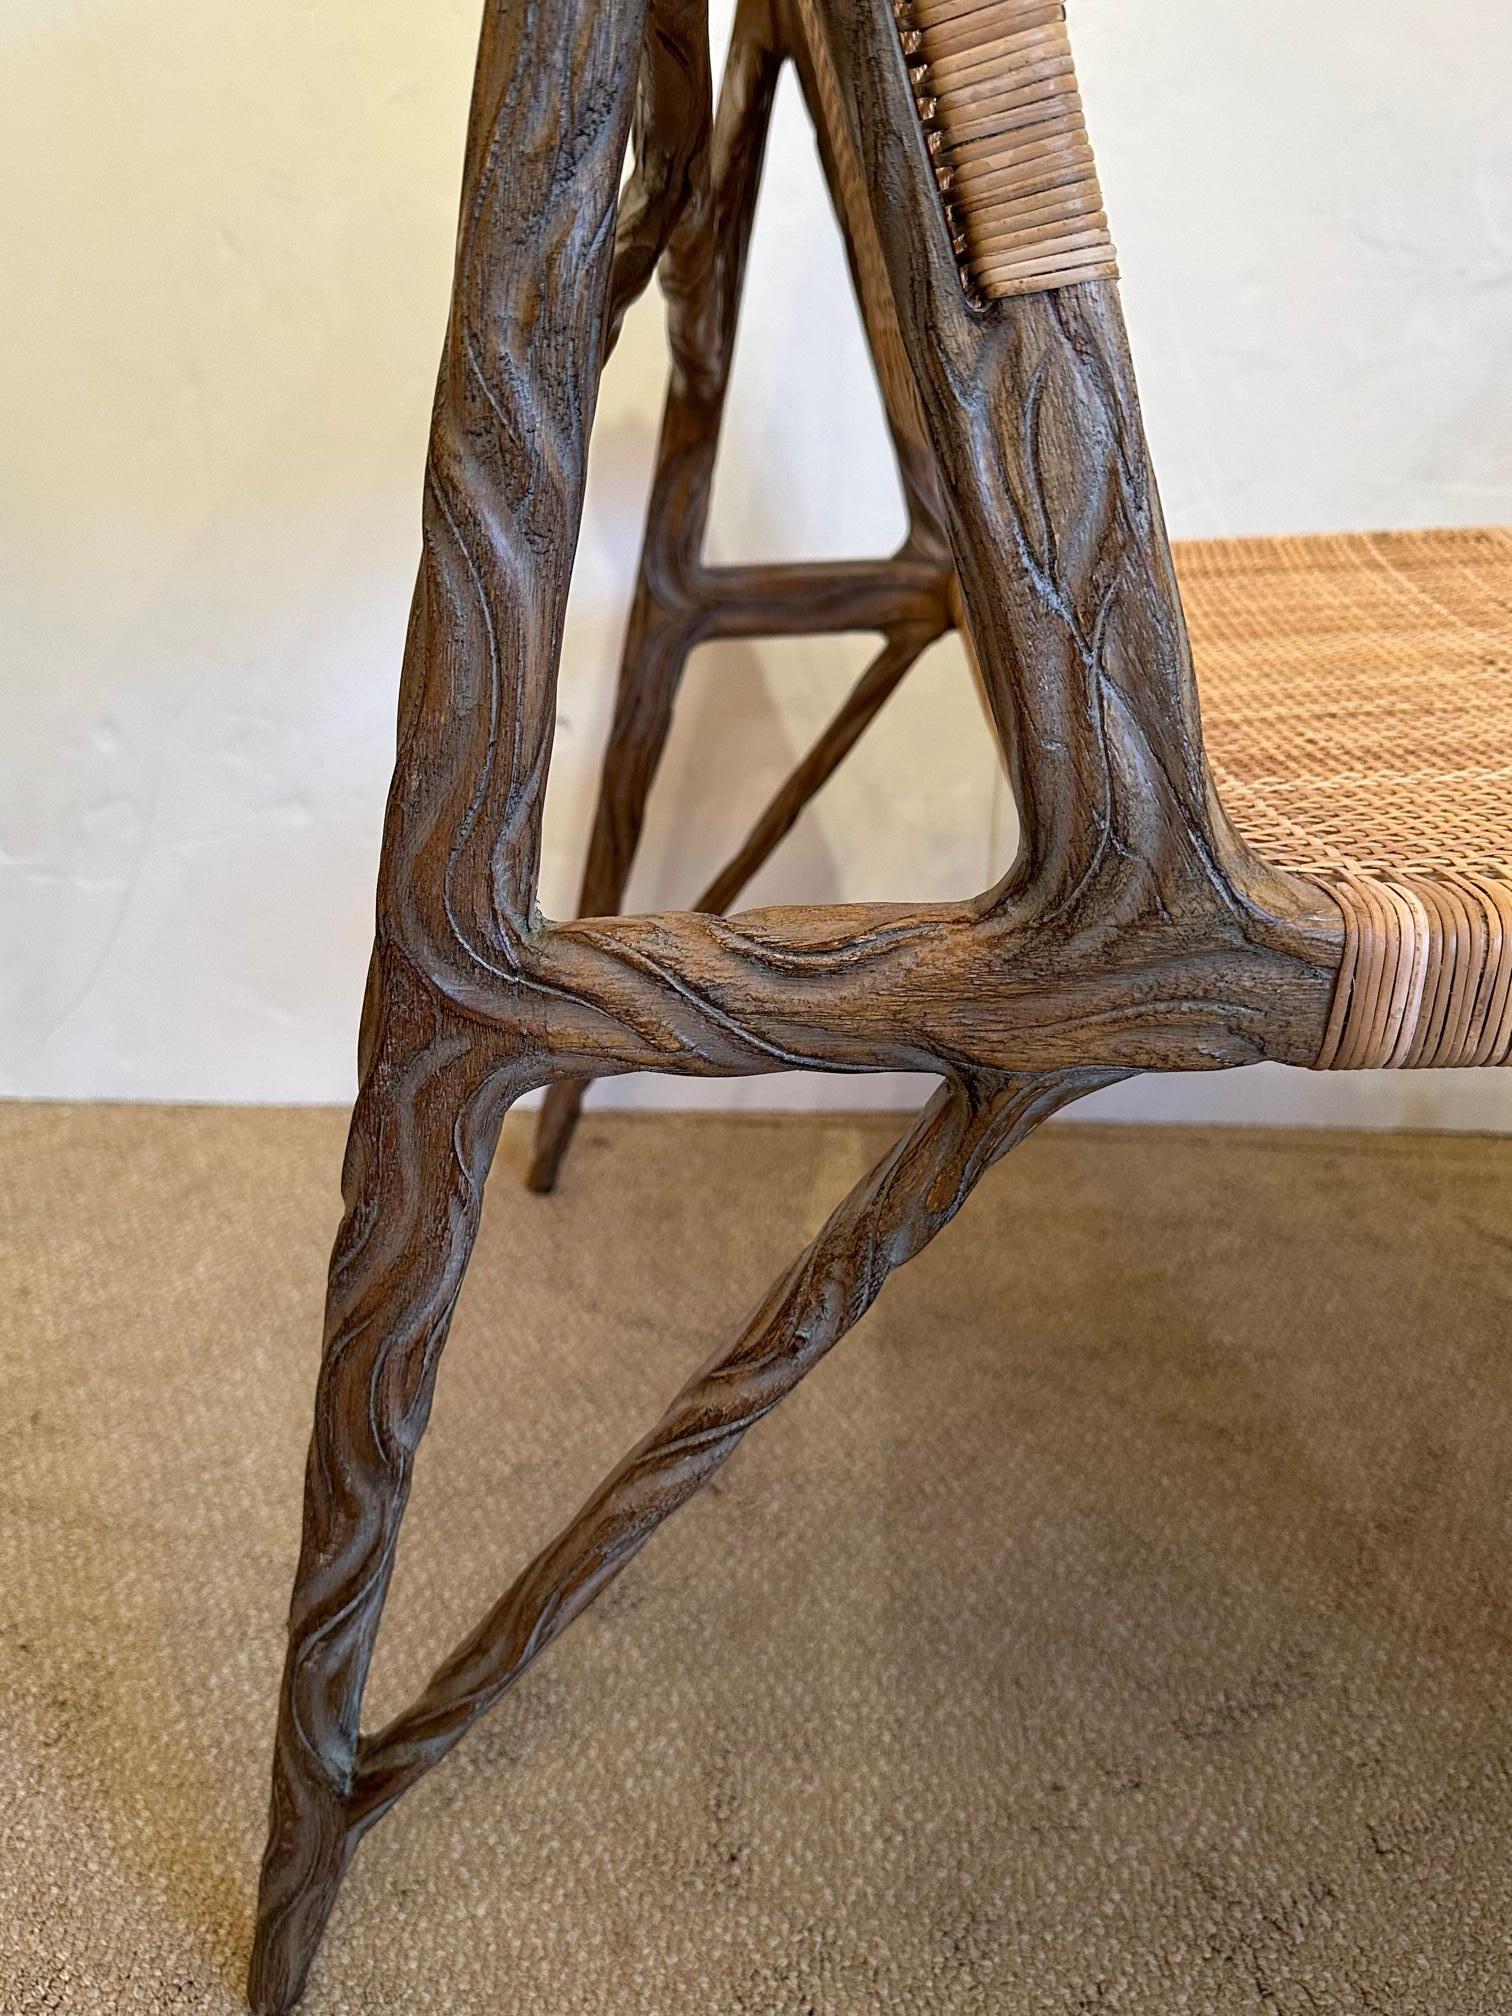 Superb Organic Modern Faux Twig and Woven Rattan Chair 2